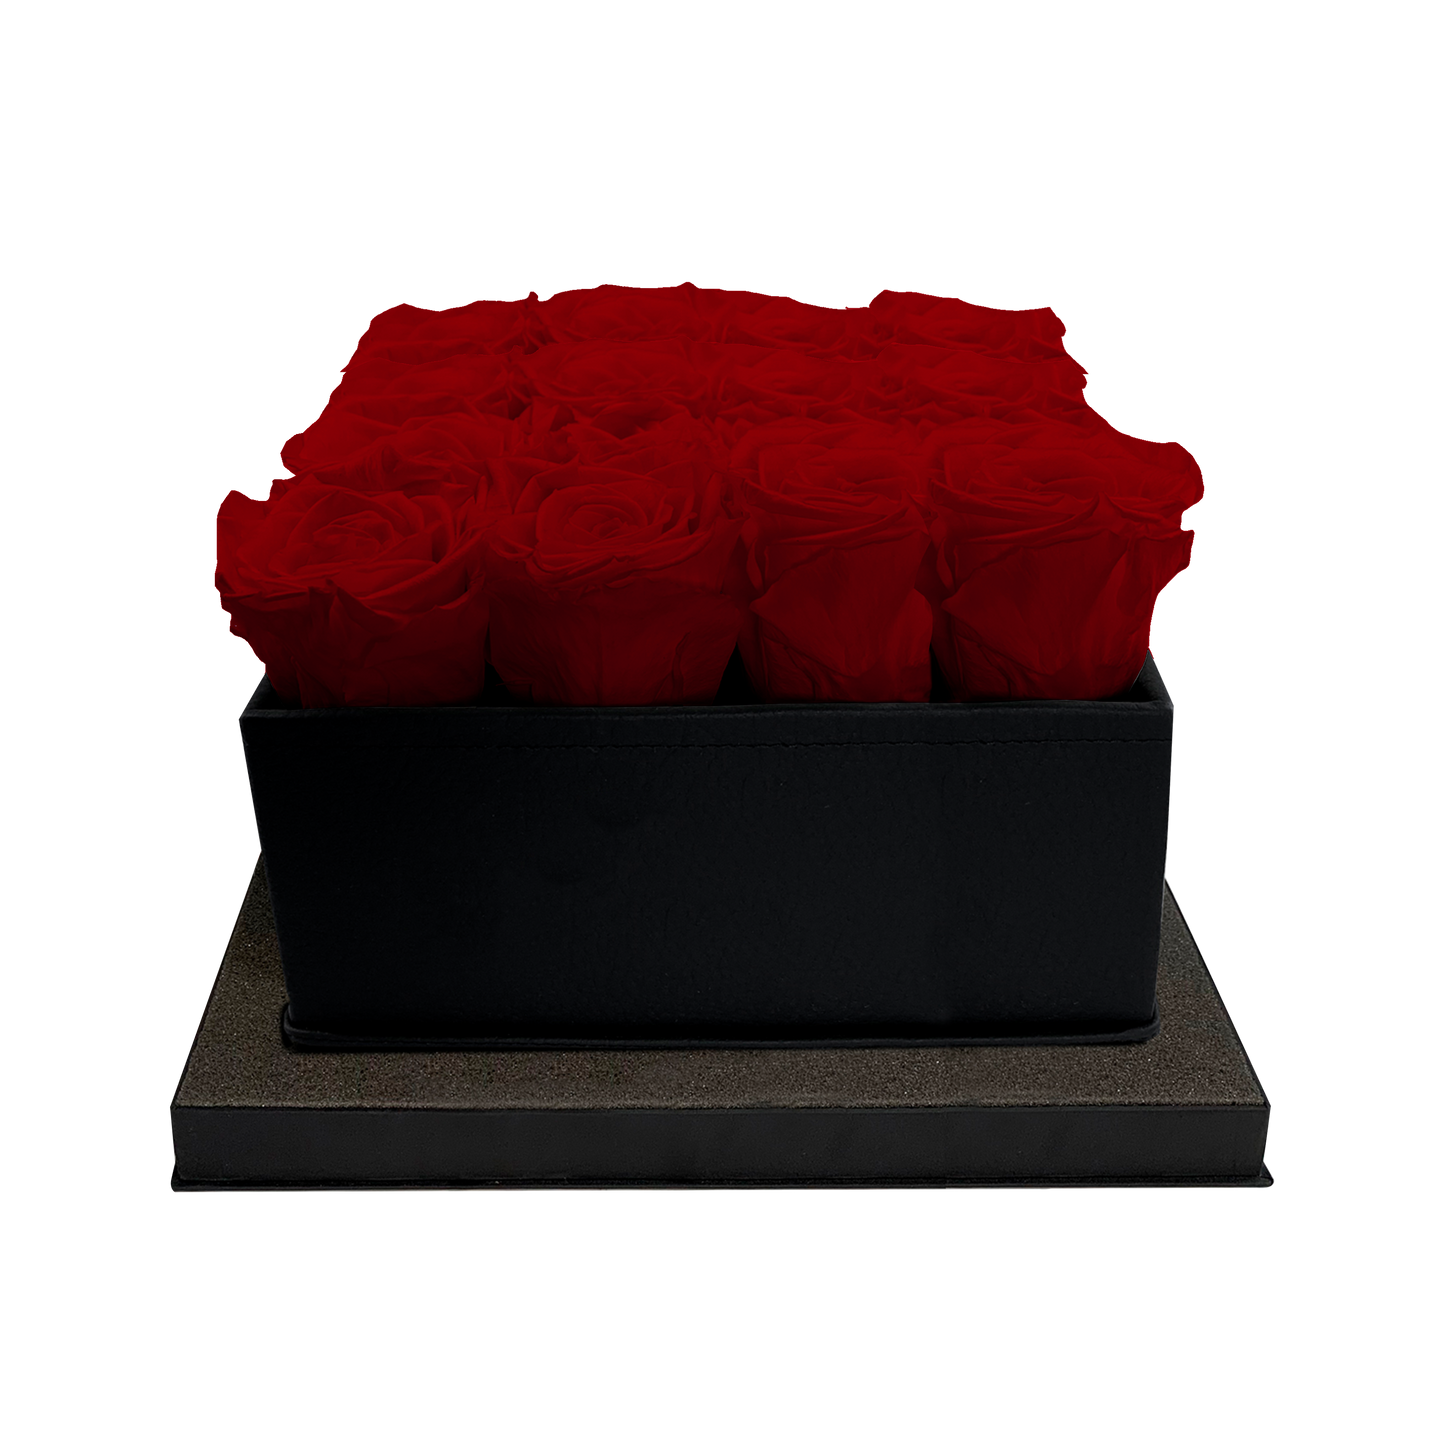 LUXURY 16 PRESERVED ROSES ARRANGEMENT - SQUARE PU LEATHER BOX